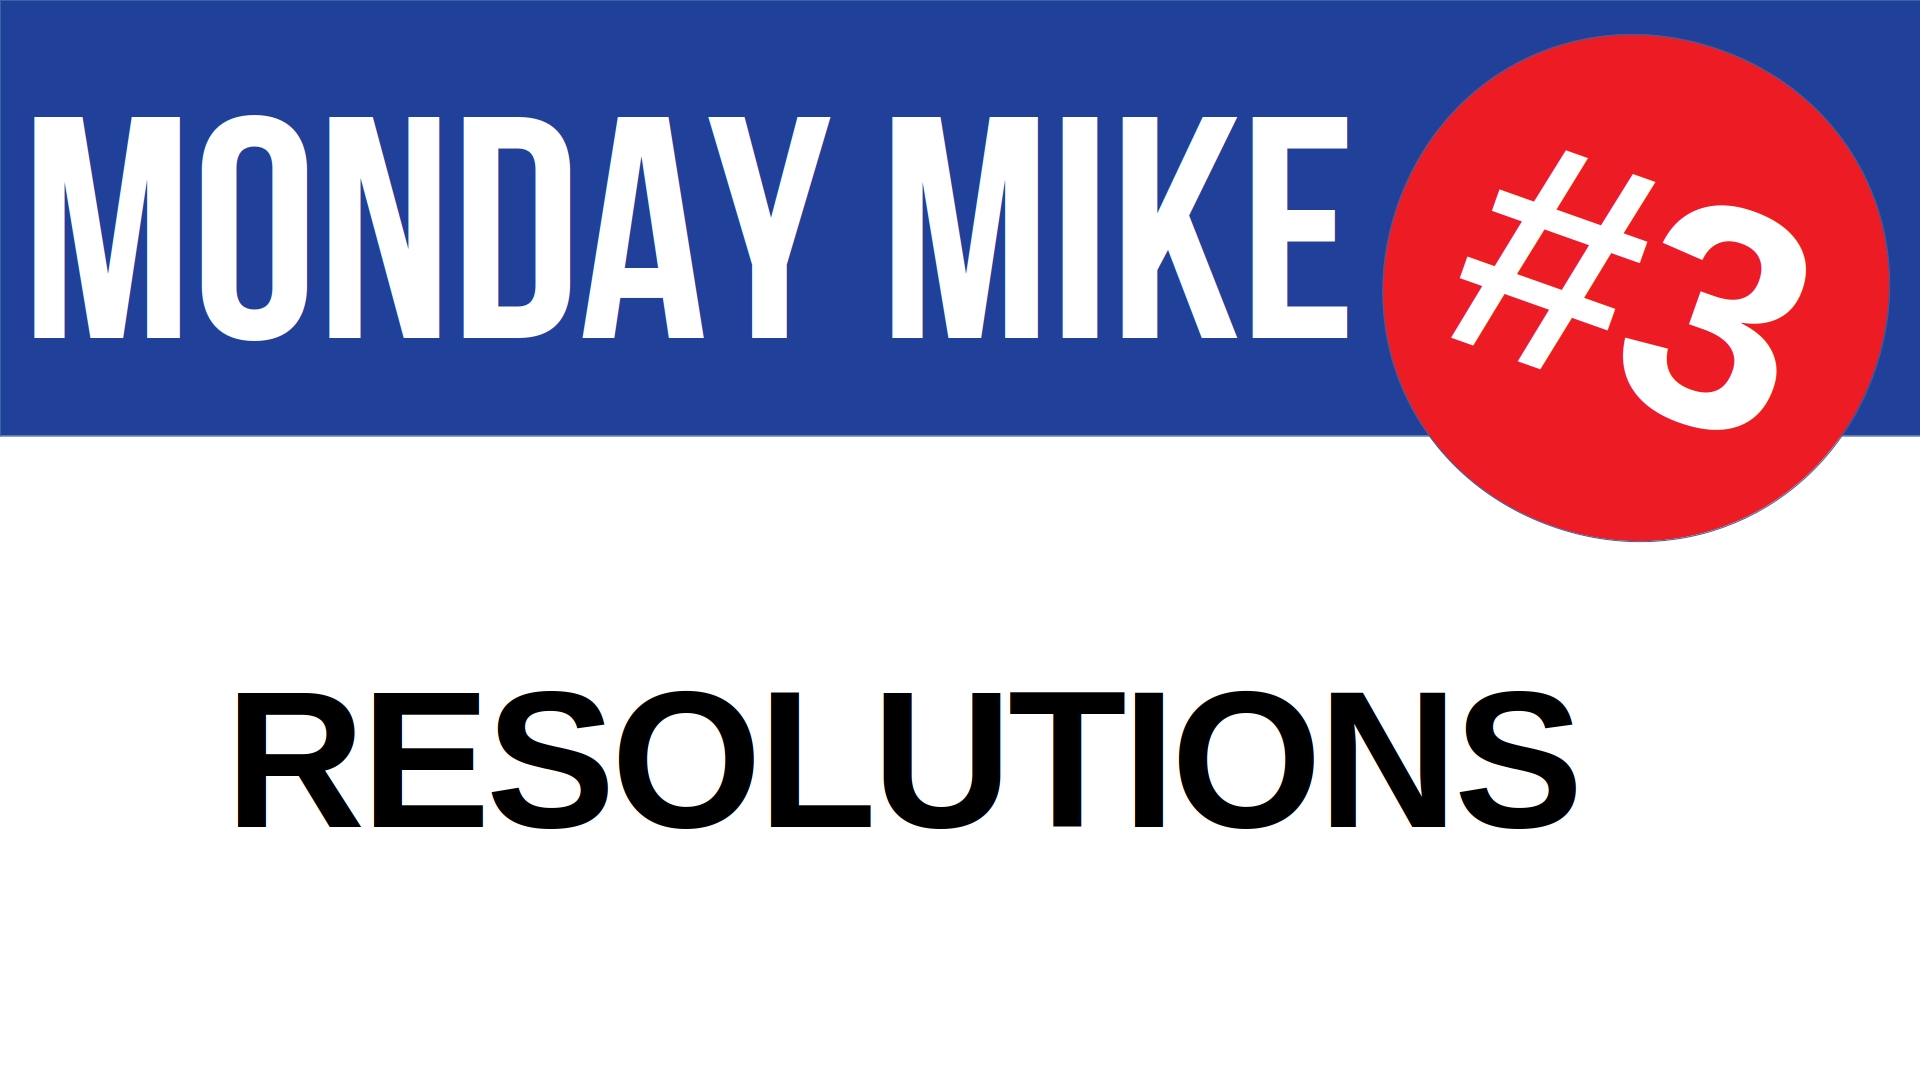 Monday Mike 3: Resolutions